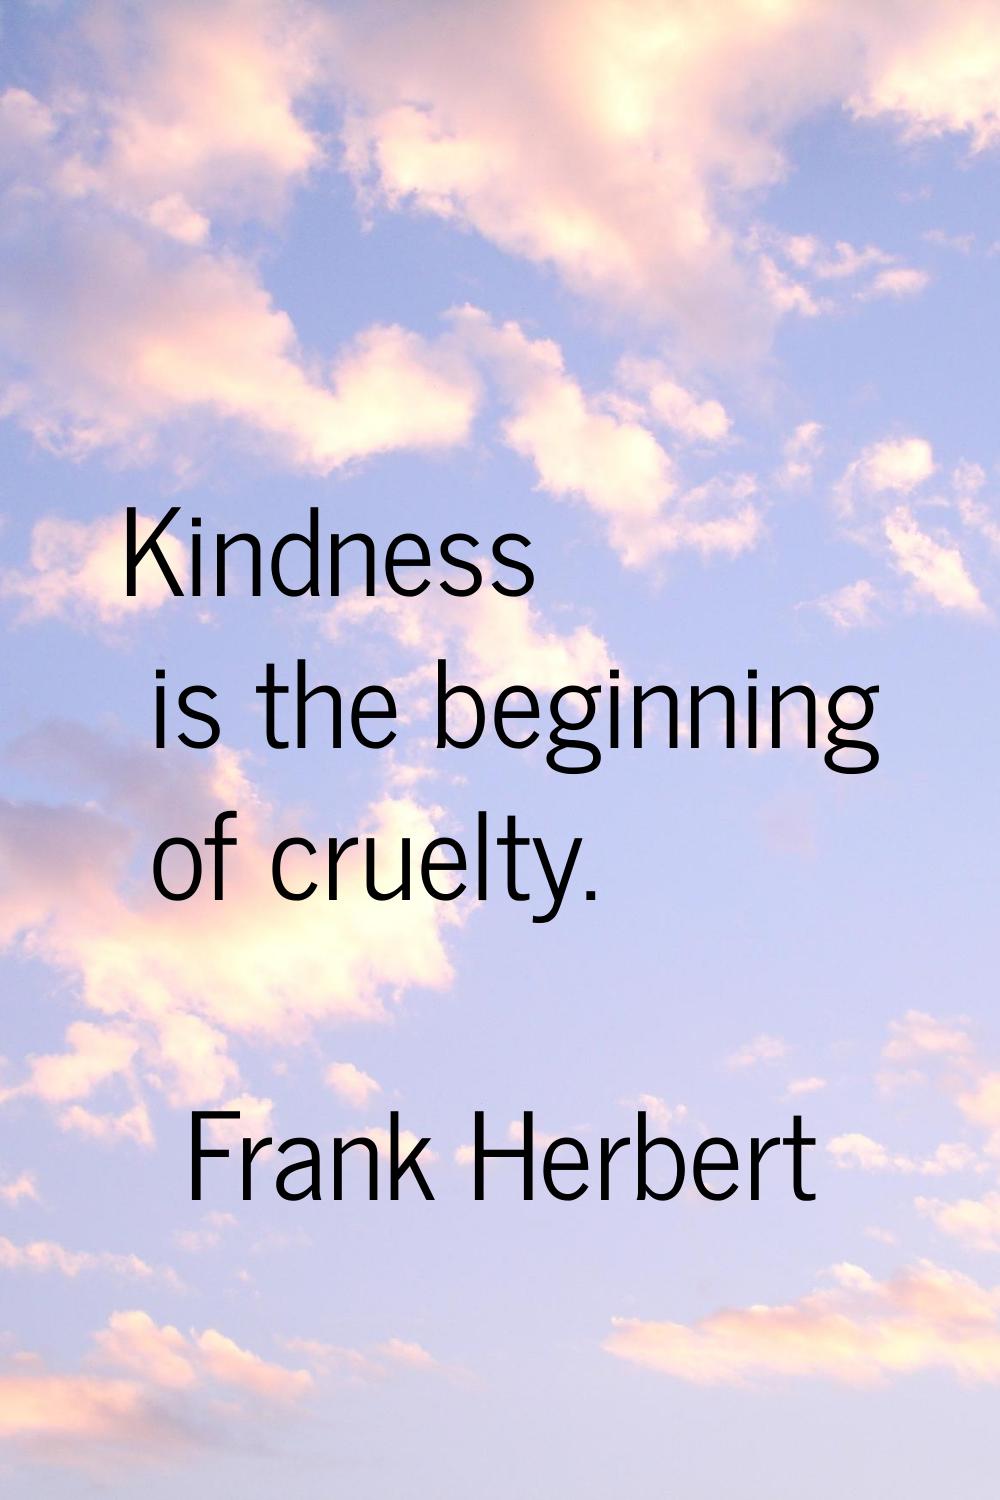 Kindness is the beginning of cruelty.